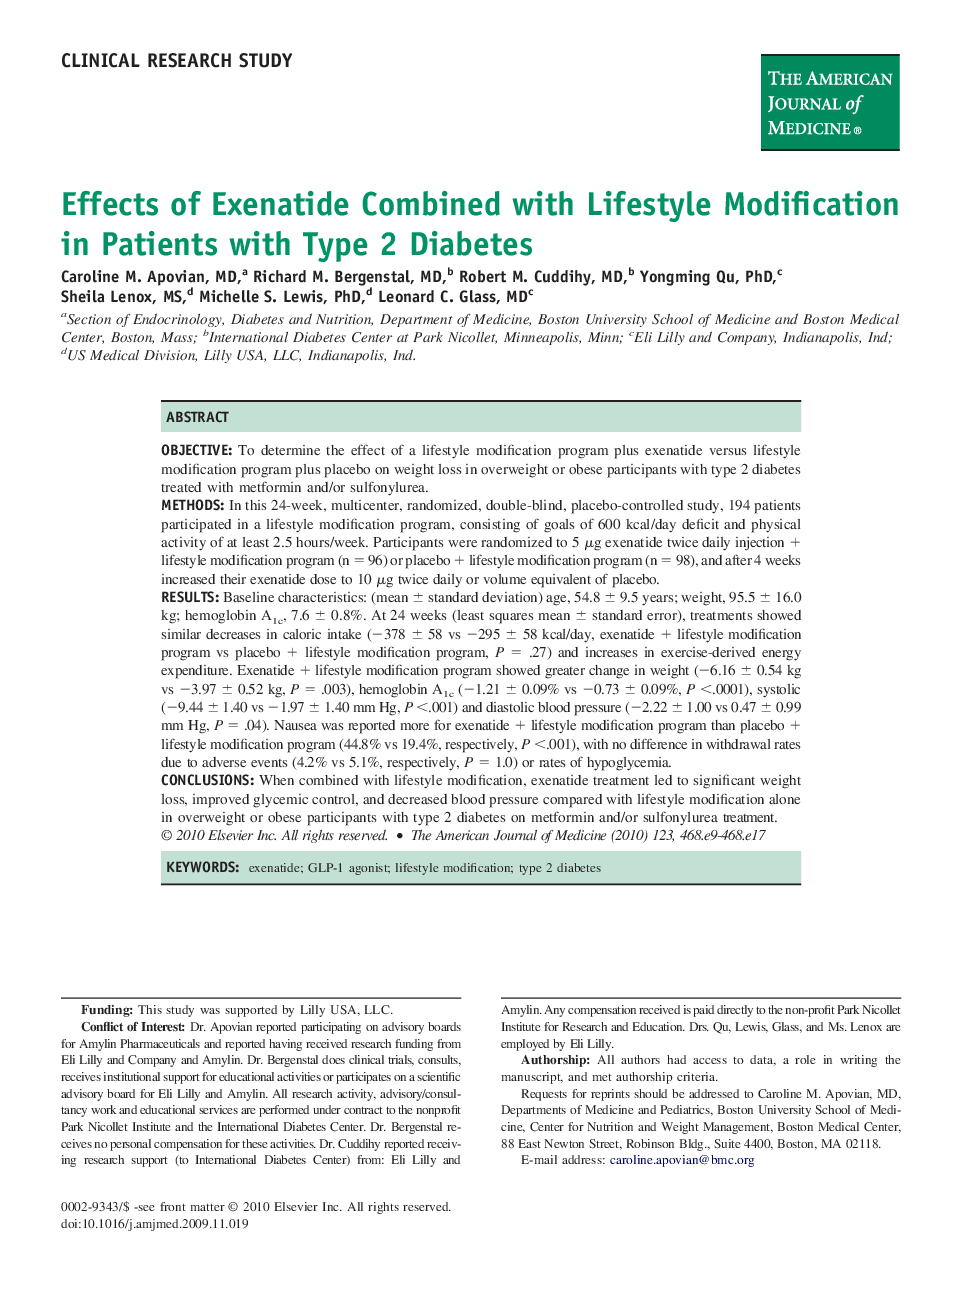 Effects of Exenatide Combined with Lifestyle Modification in Patients with Type 2 Diabetes